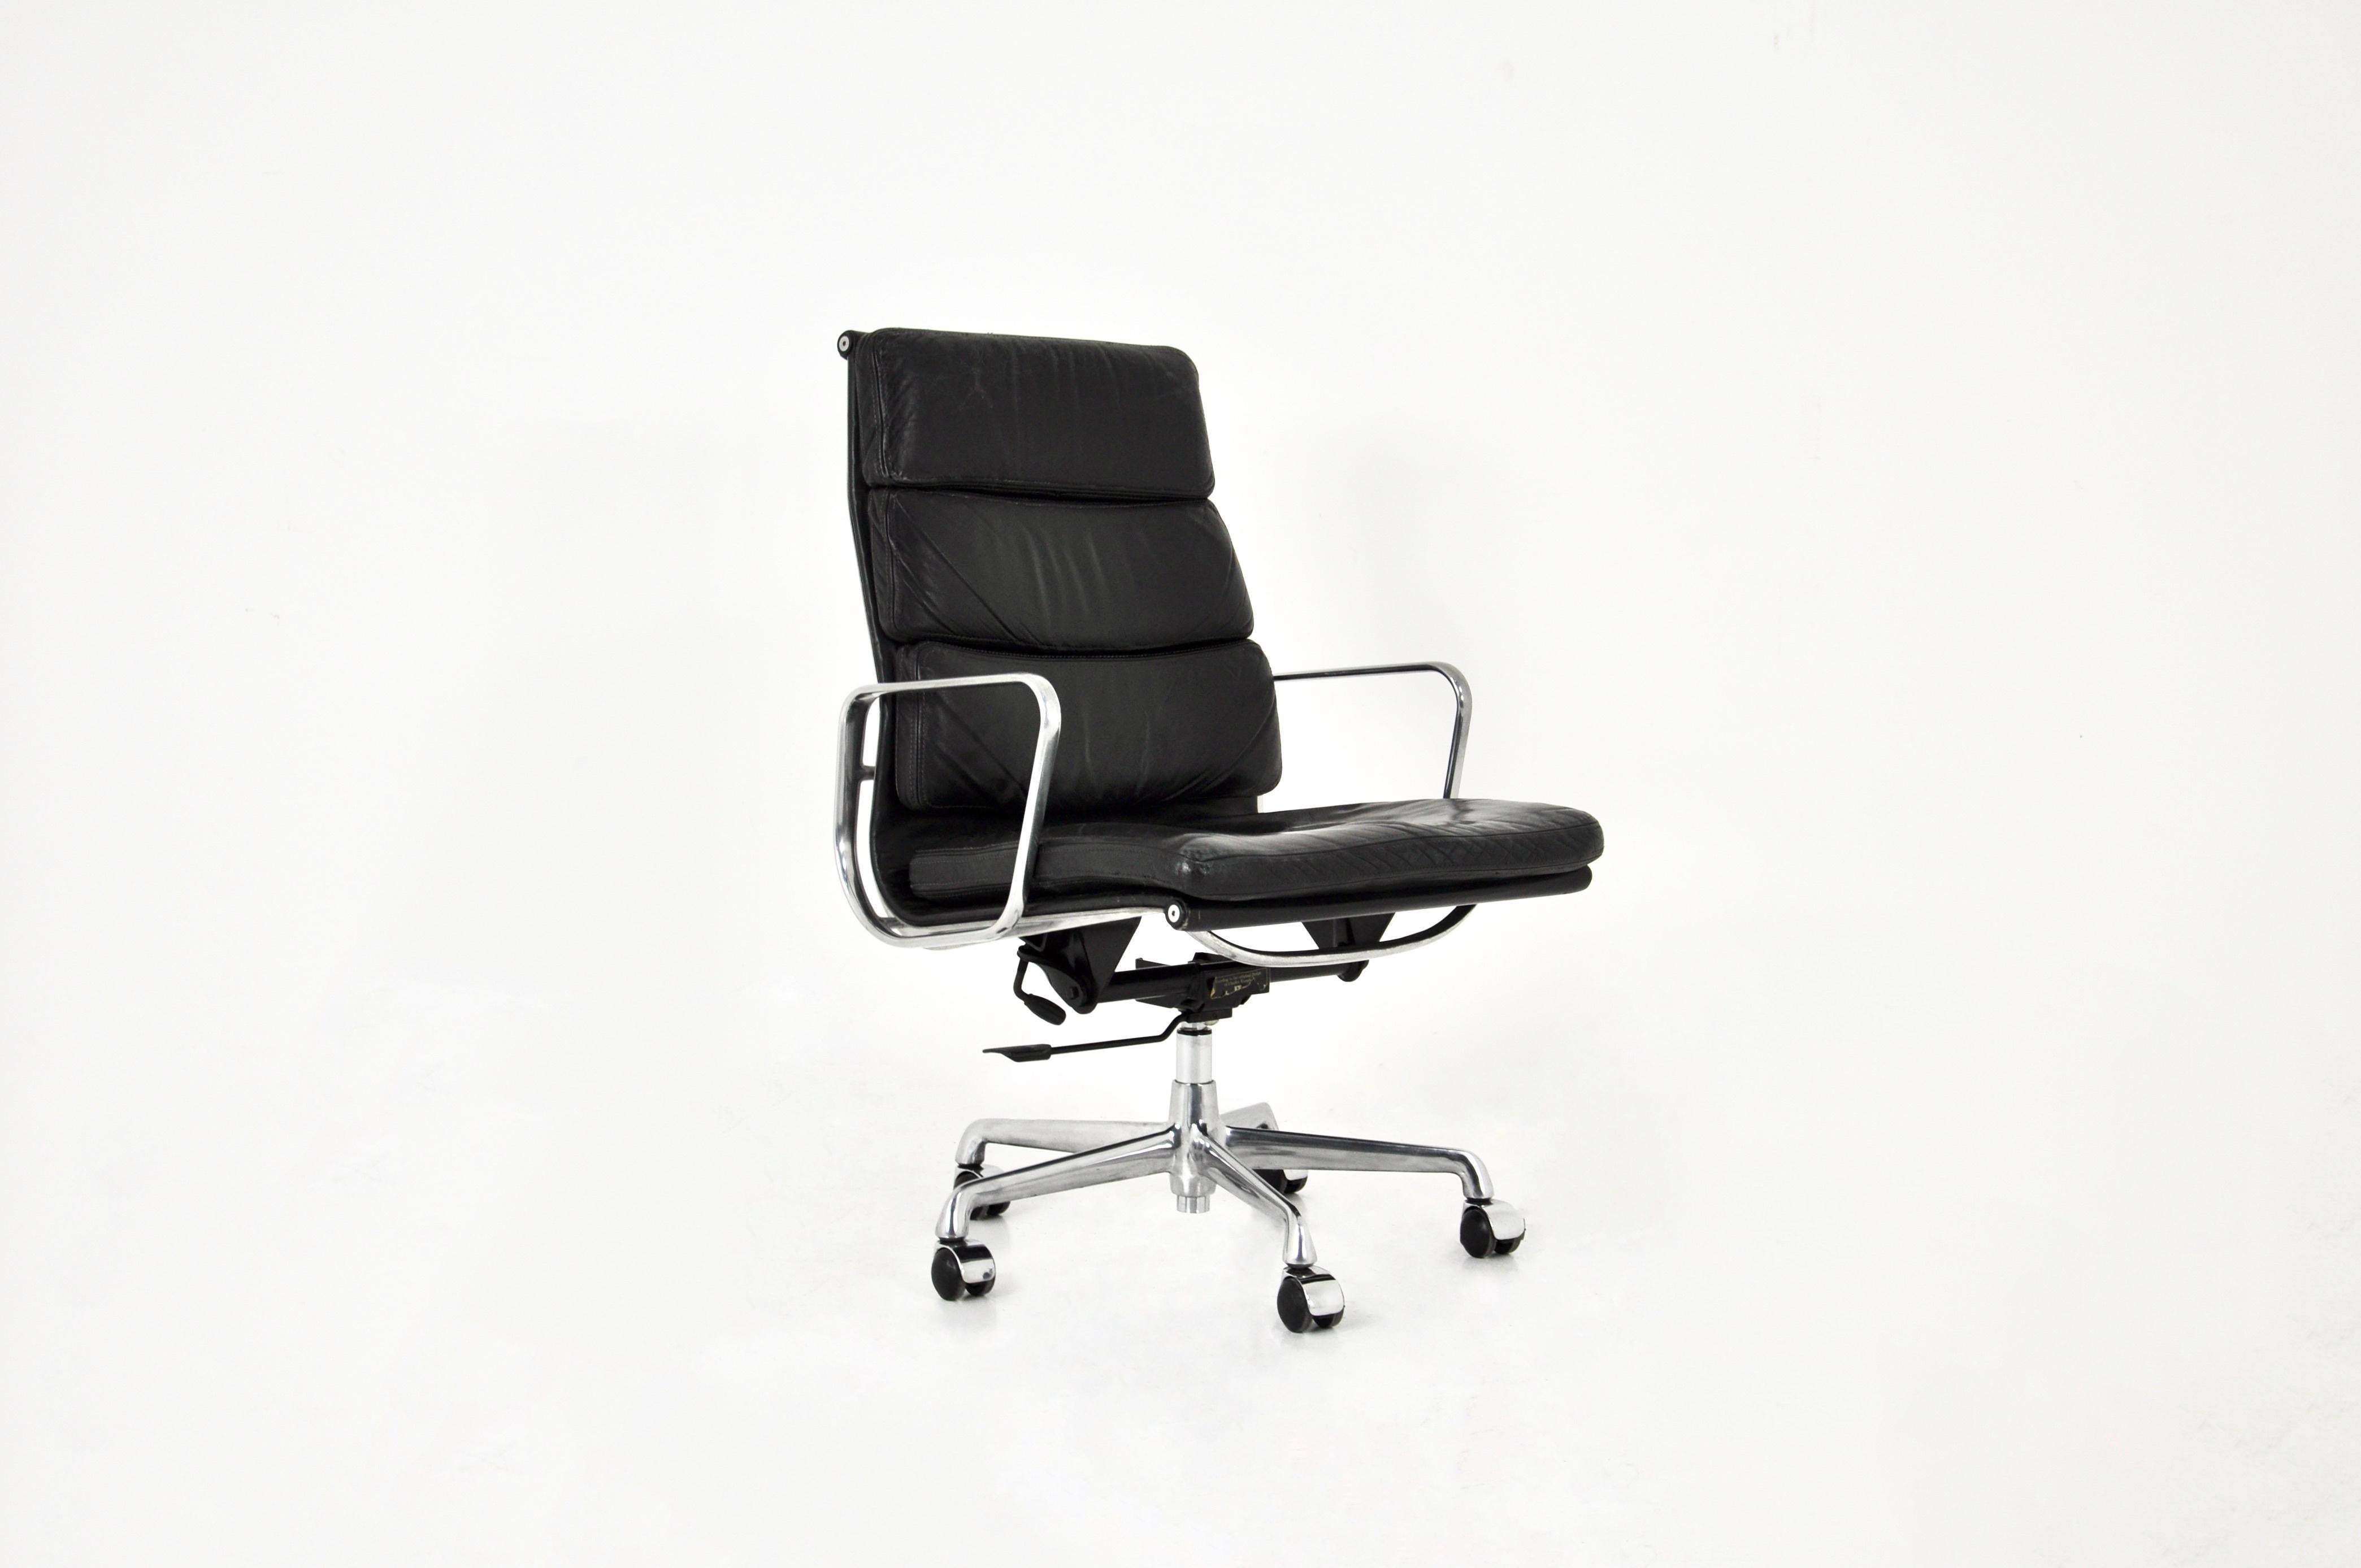 Leather chair with aluminum base and wheels. Stamped ICF under the seat. Turns on itself, reclining and height-adjustable. Seat height: 46 cm, max. seat height: 55 cm. Wear due to age and time. 